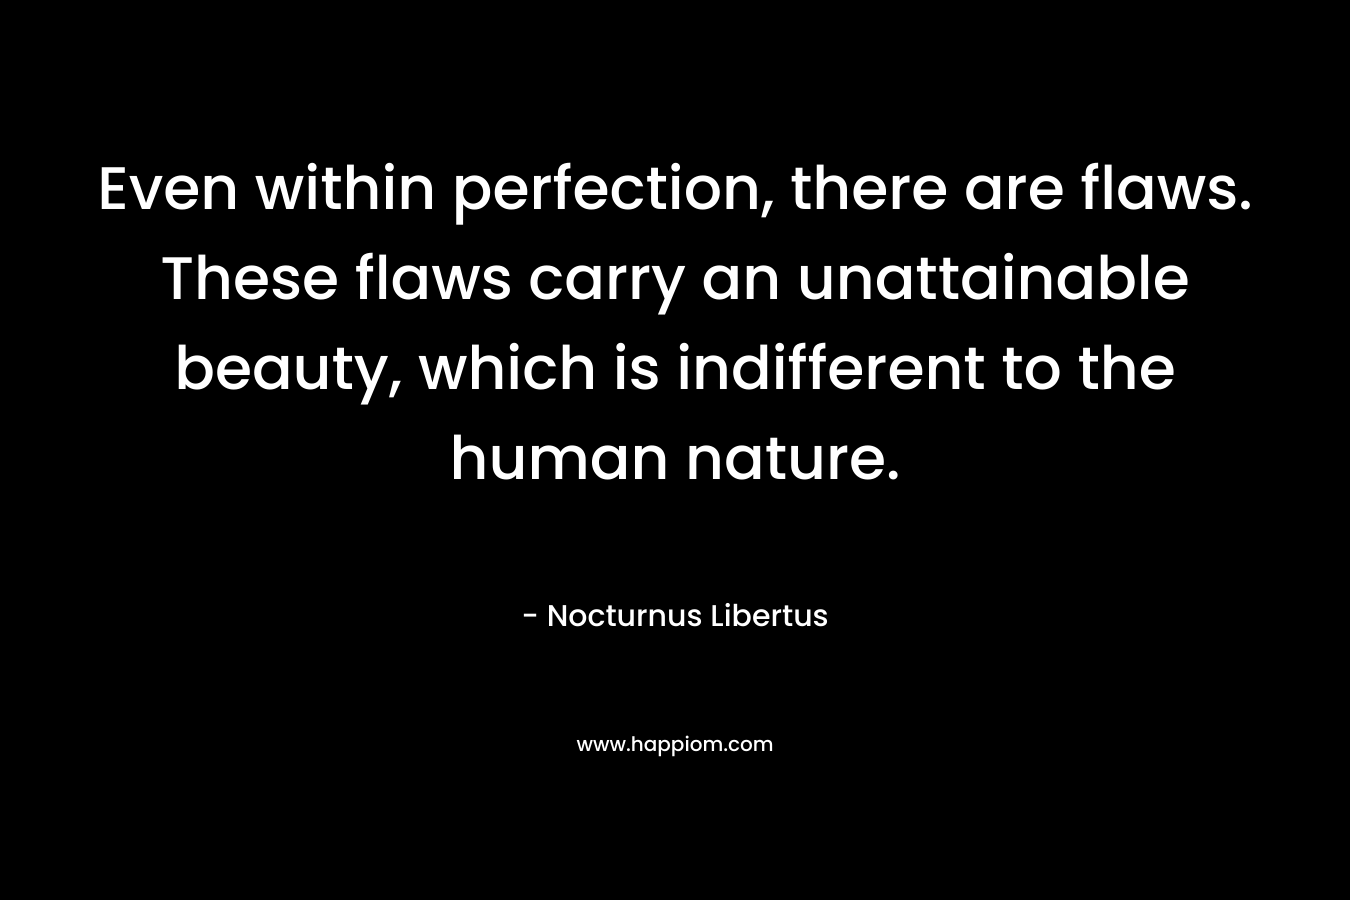 Even within perfection, there are flaws. These flaws carry an unattainable beauty, which is indifferent to the human nature.